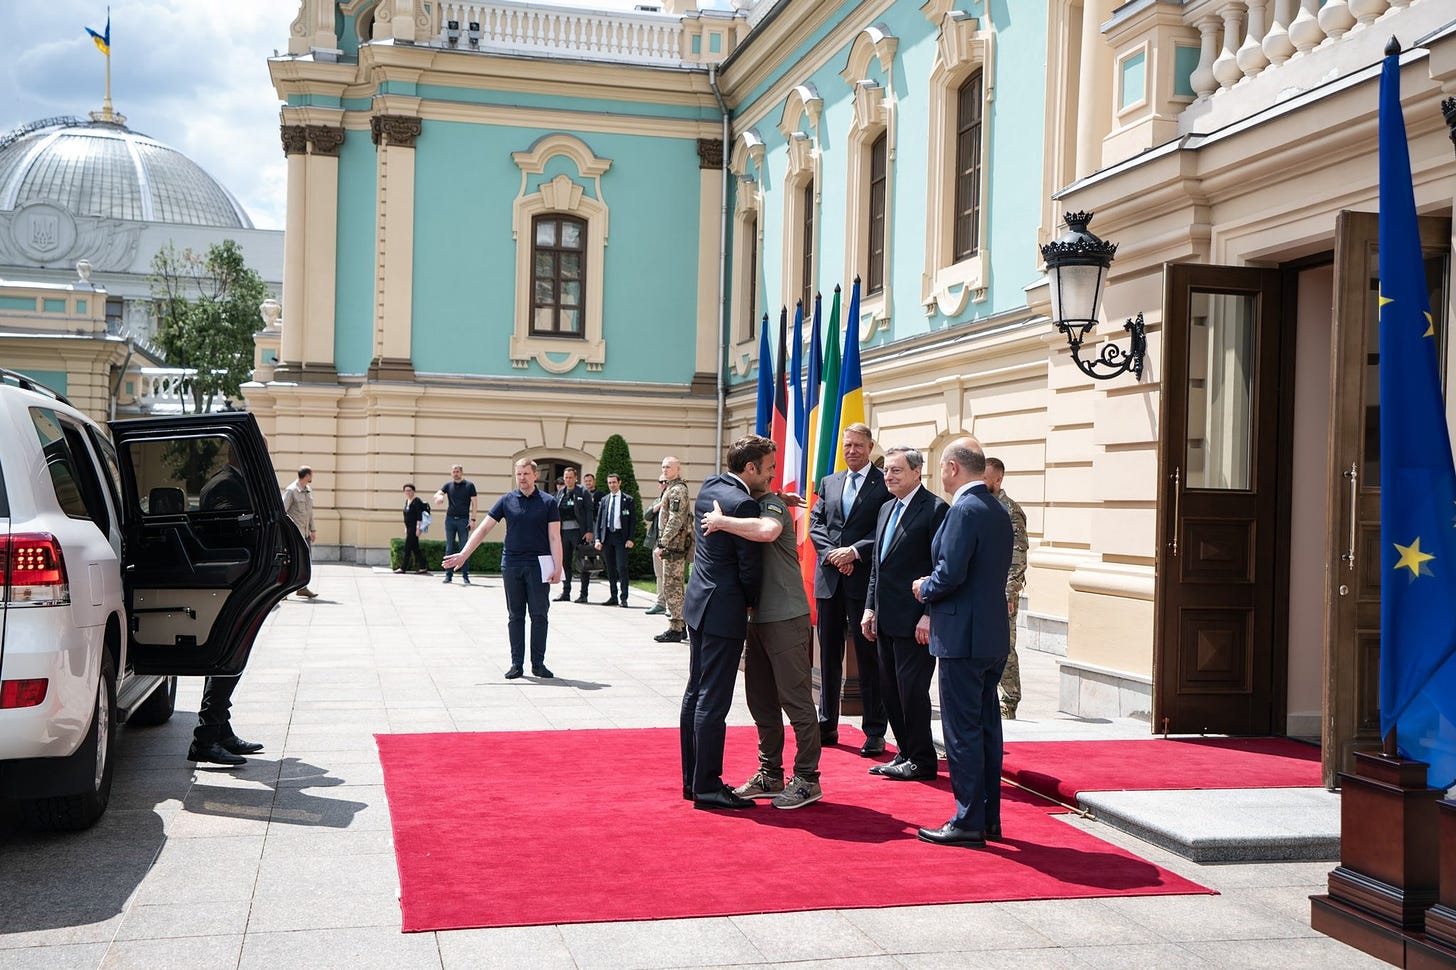 French President Macron, German Chancellor Scholz, Italian PM Draghi and Romanian President Iohannis being received by Ukrainian President Zelenskyy in Kyiv (Image: Twitter/@EmmanuelMacron)